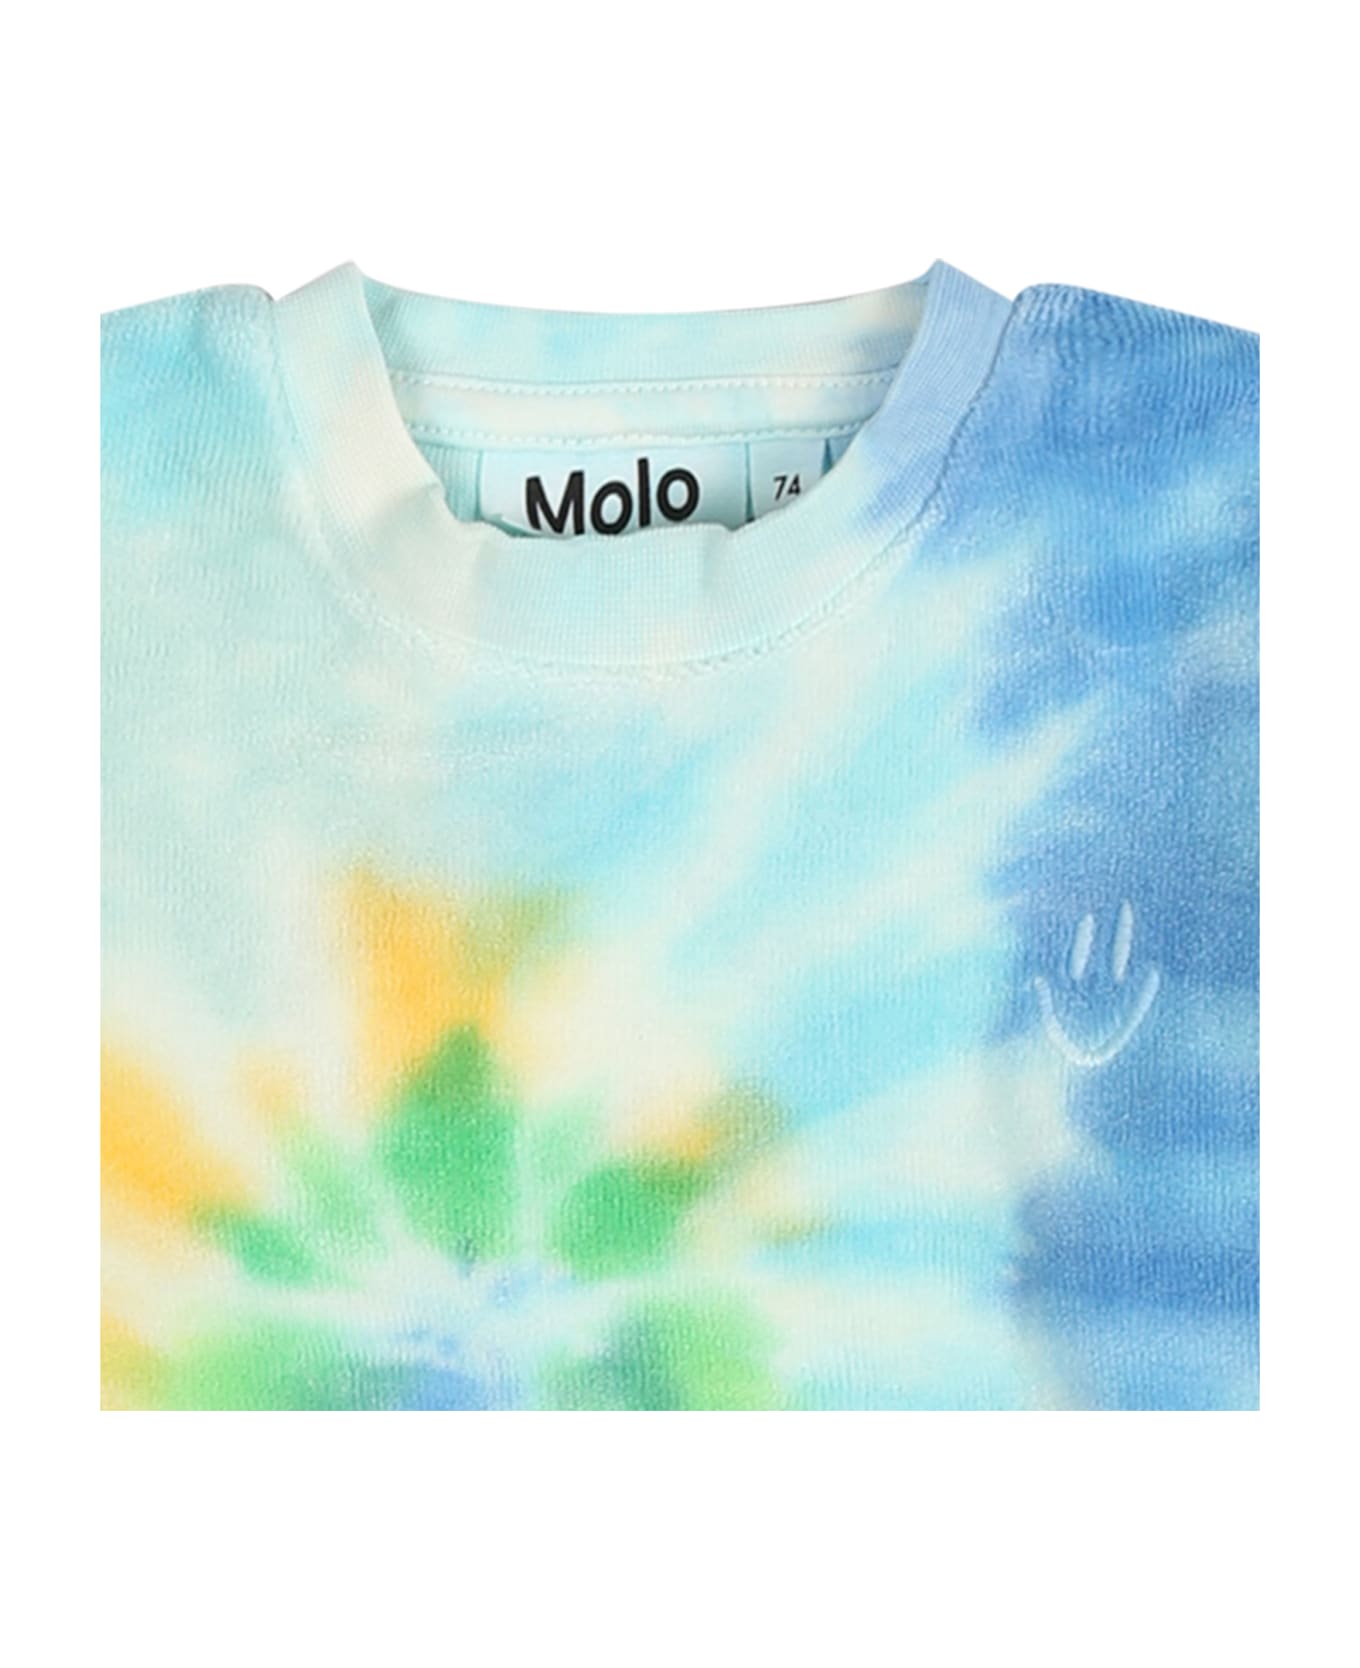 Molo Light Blue Sweatshirt For Babykids With Smiley - Multicolor